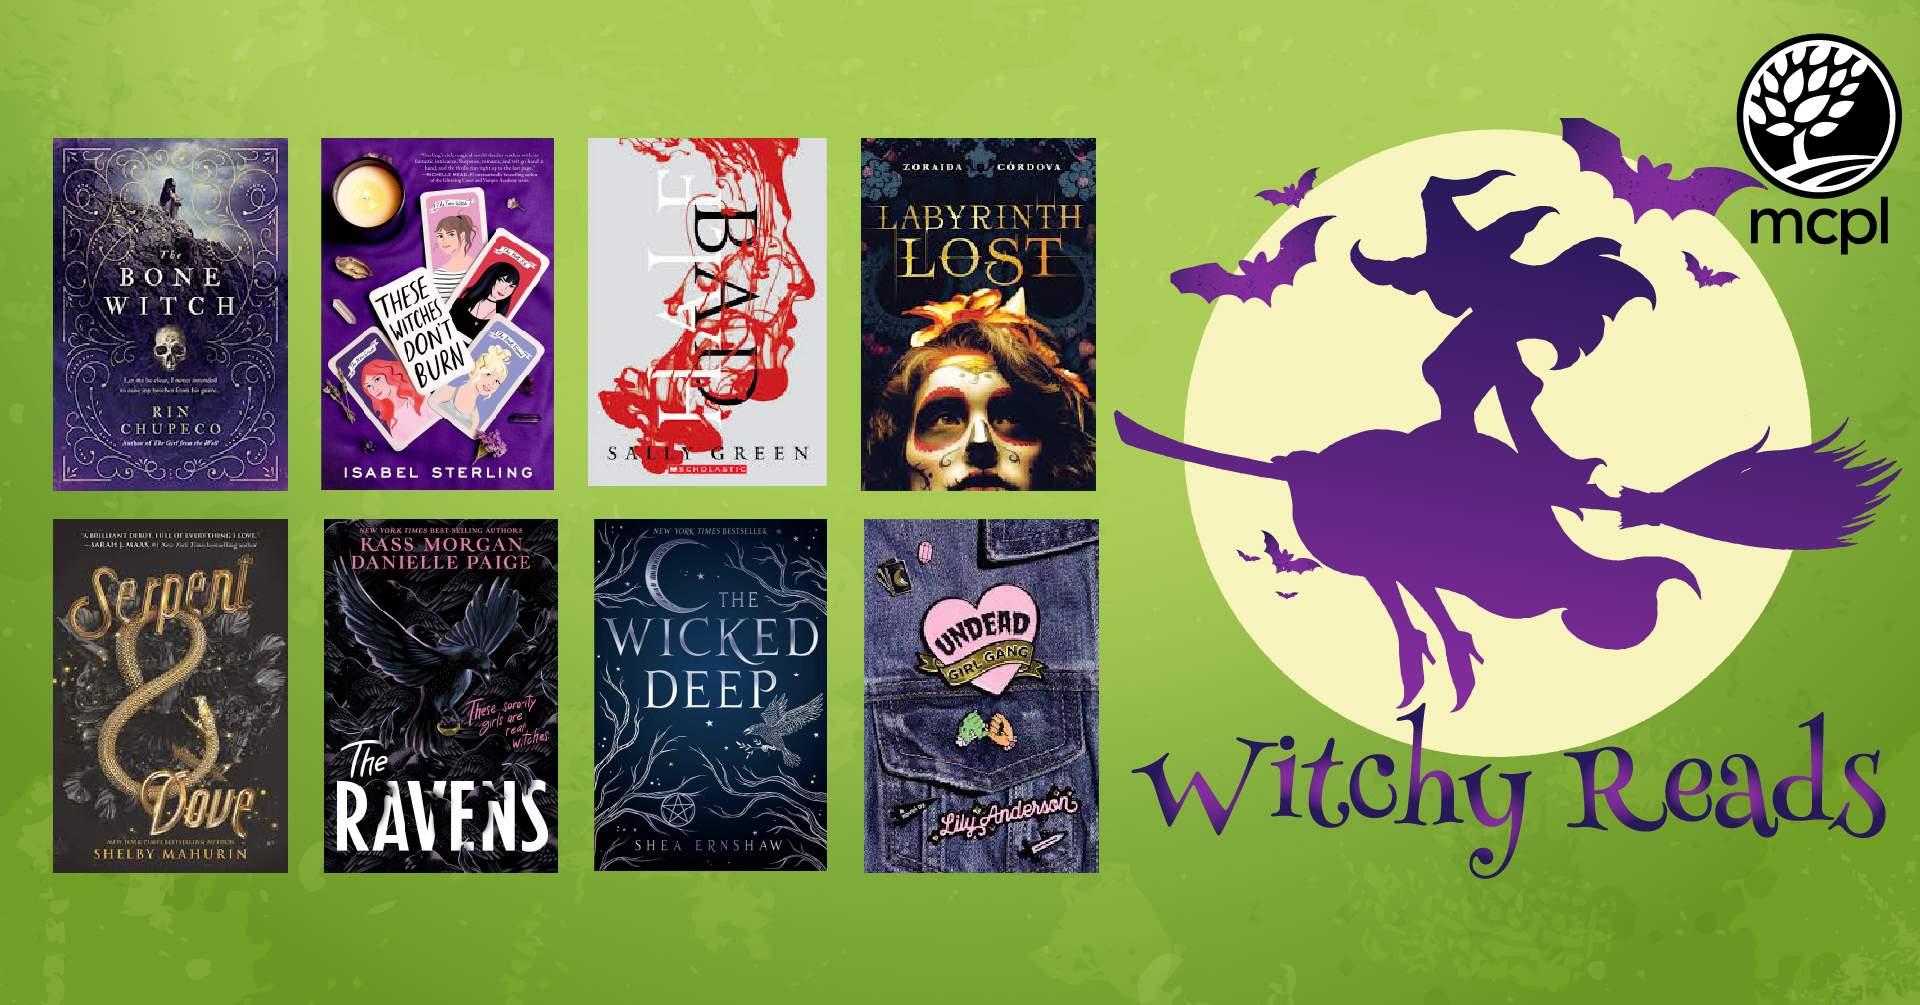 Witchy Reads with a witch silouette and book covers